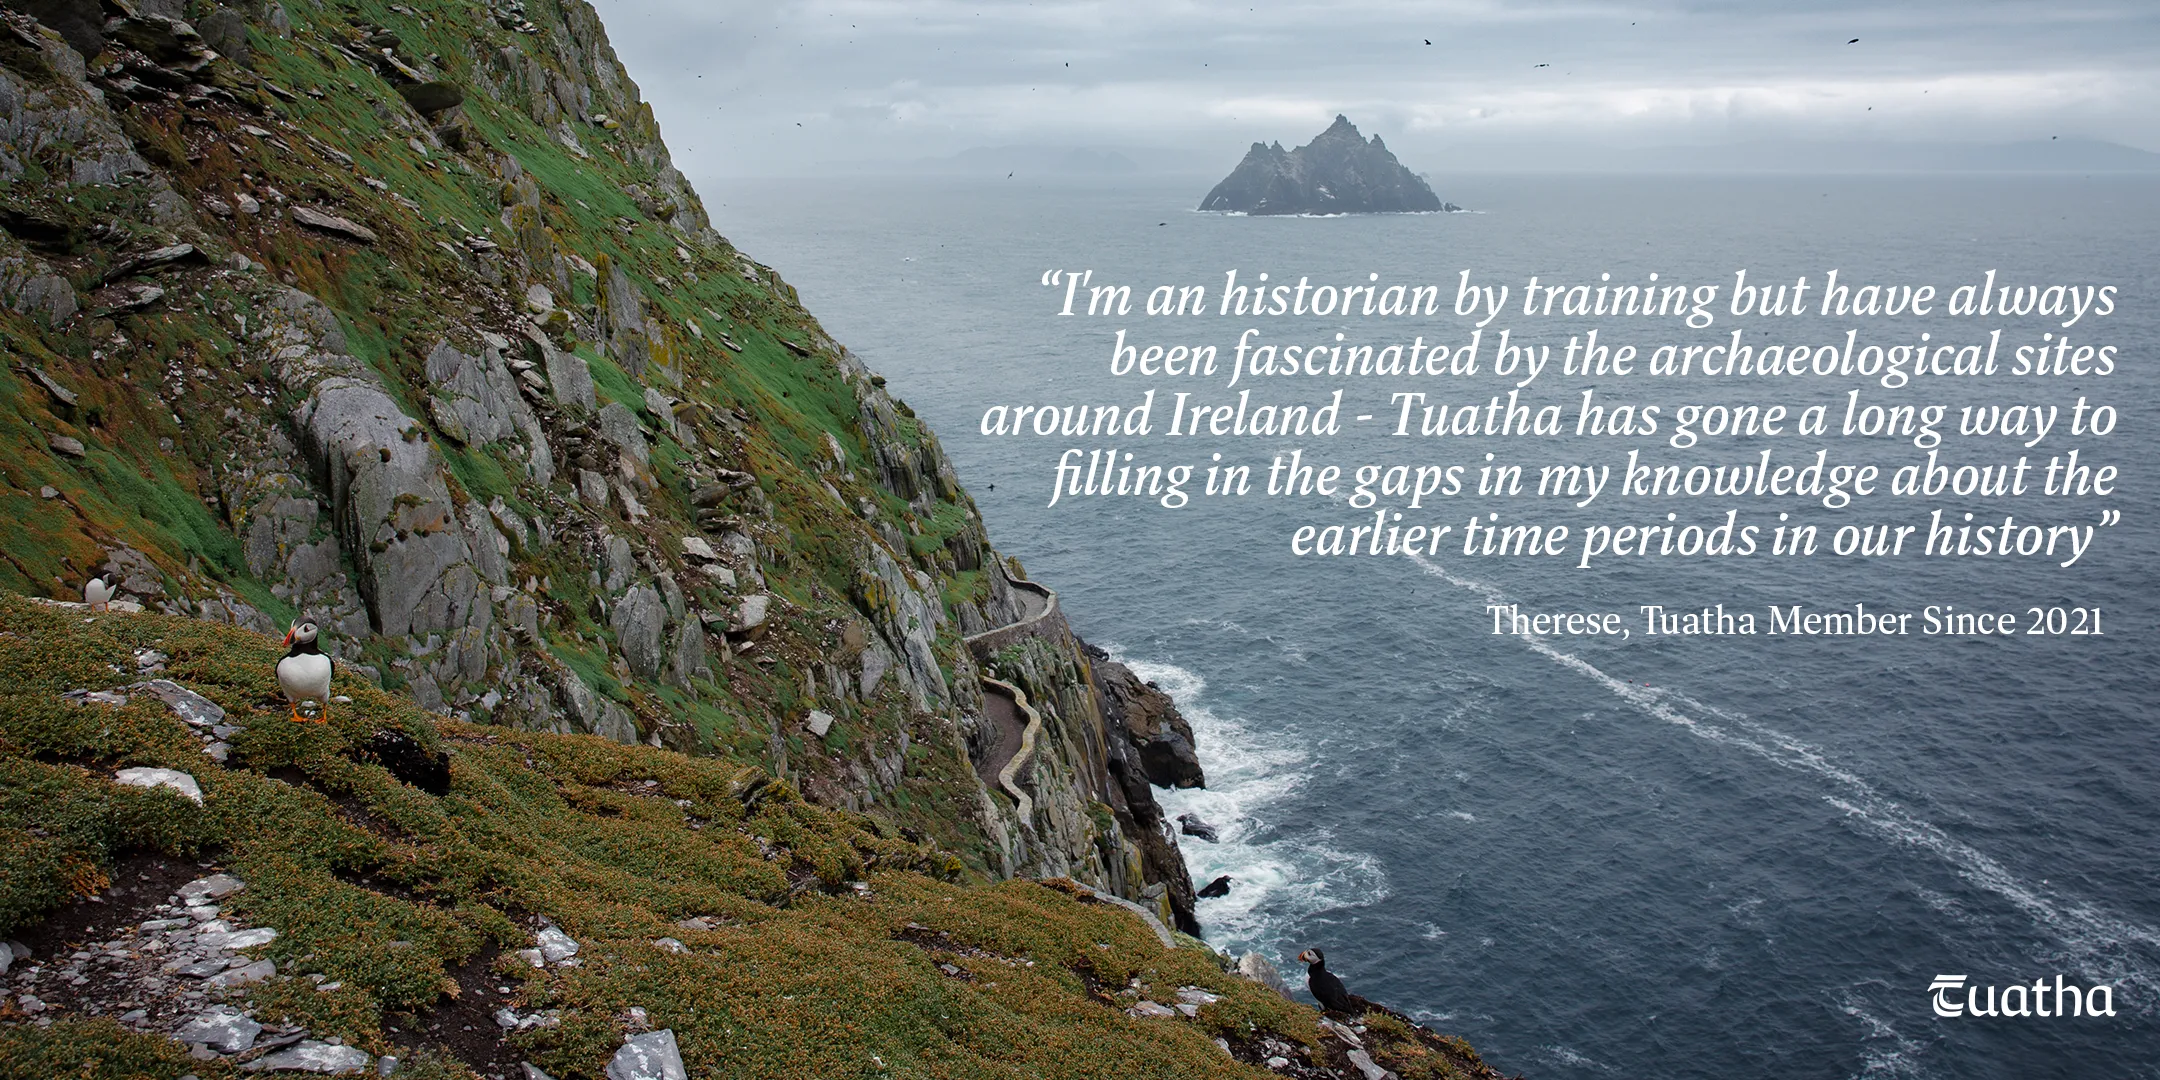 Dig into the stories of Ireland with online courses in Irish archaeology and history